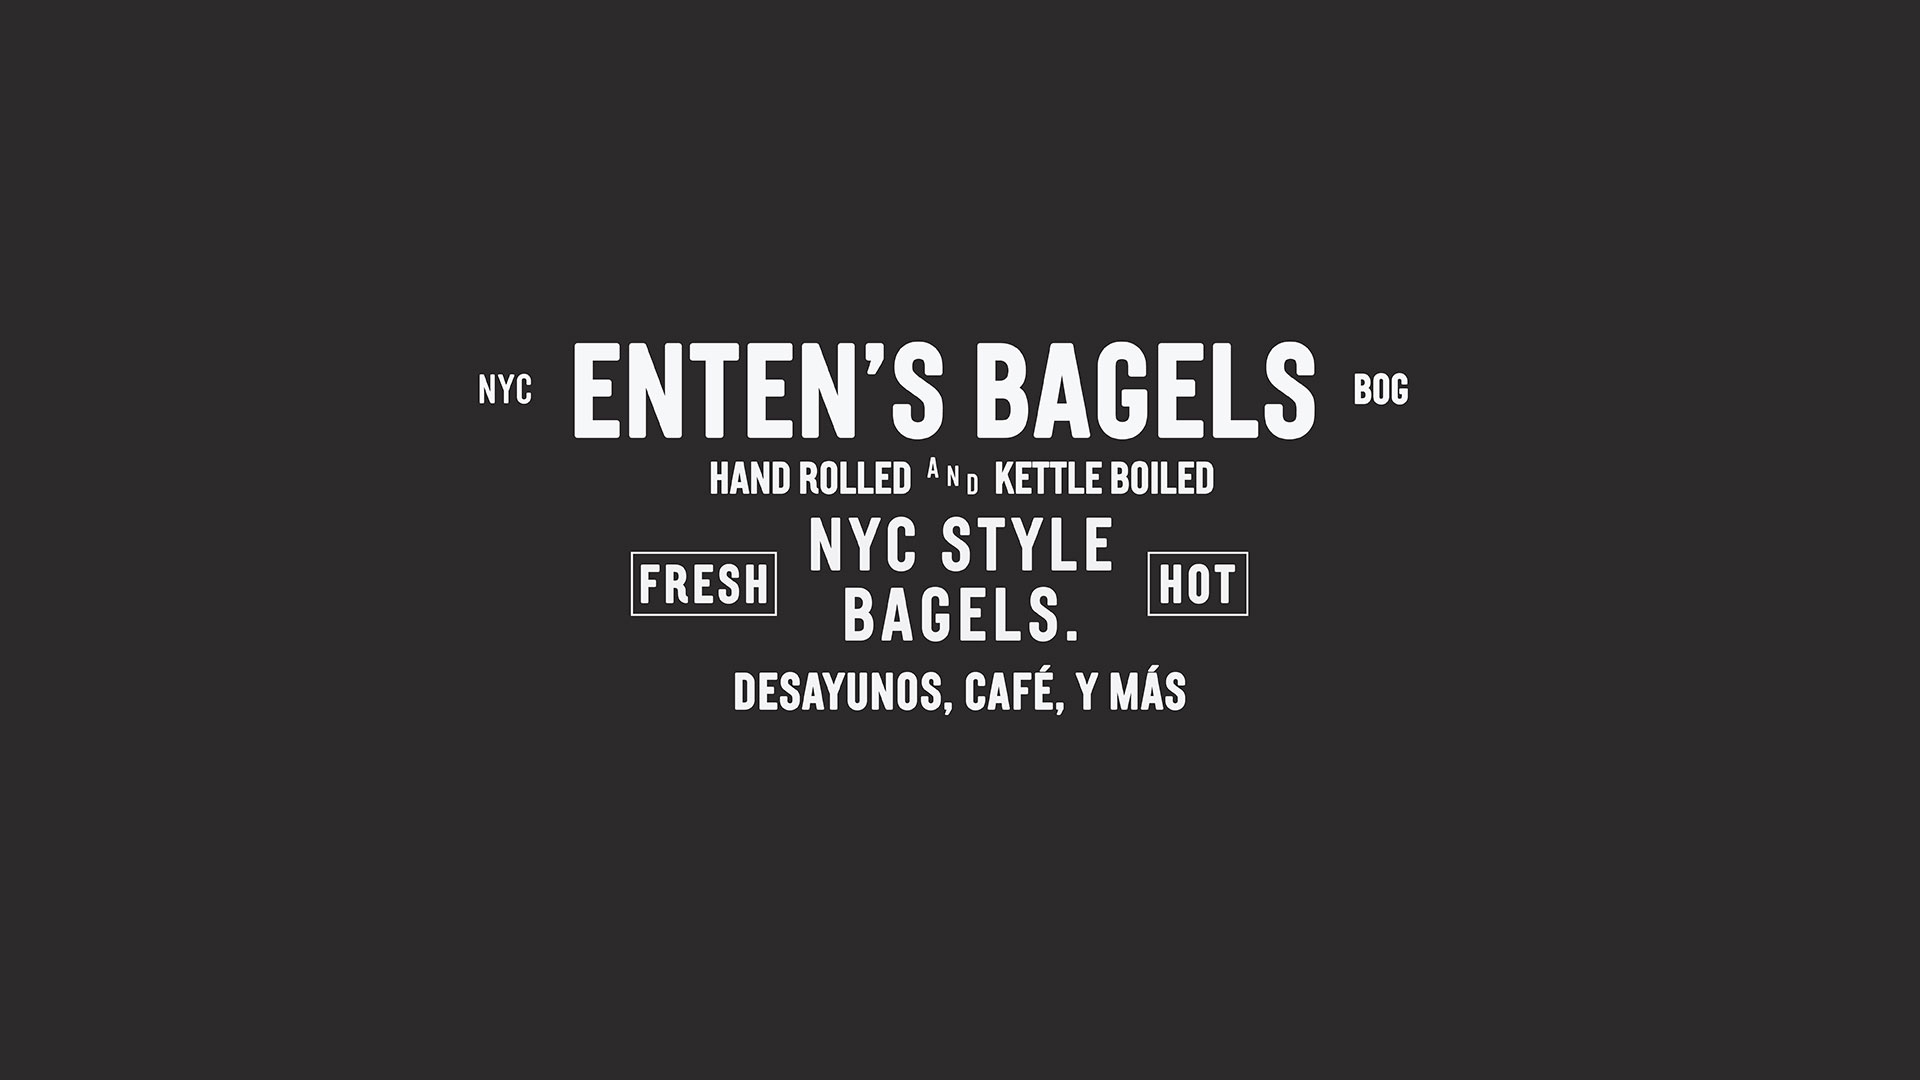 Enten's Bagels logo and identity